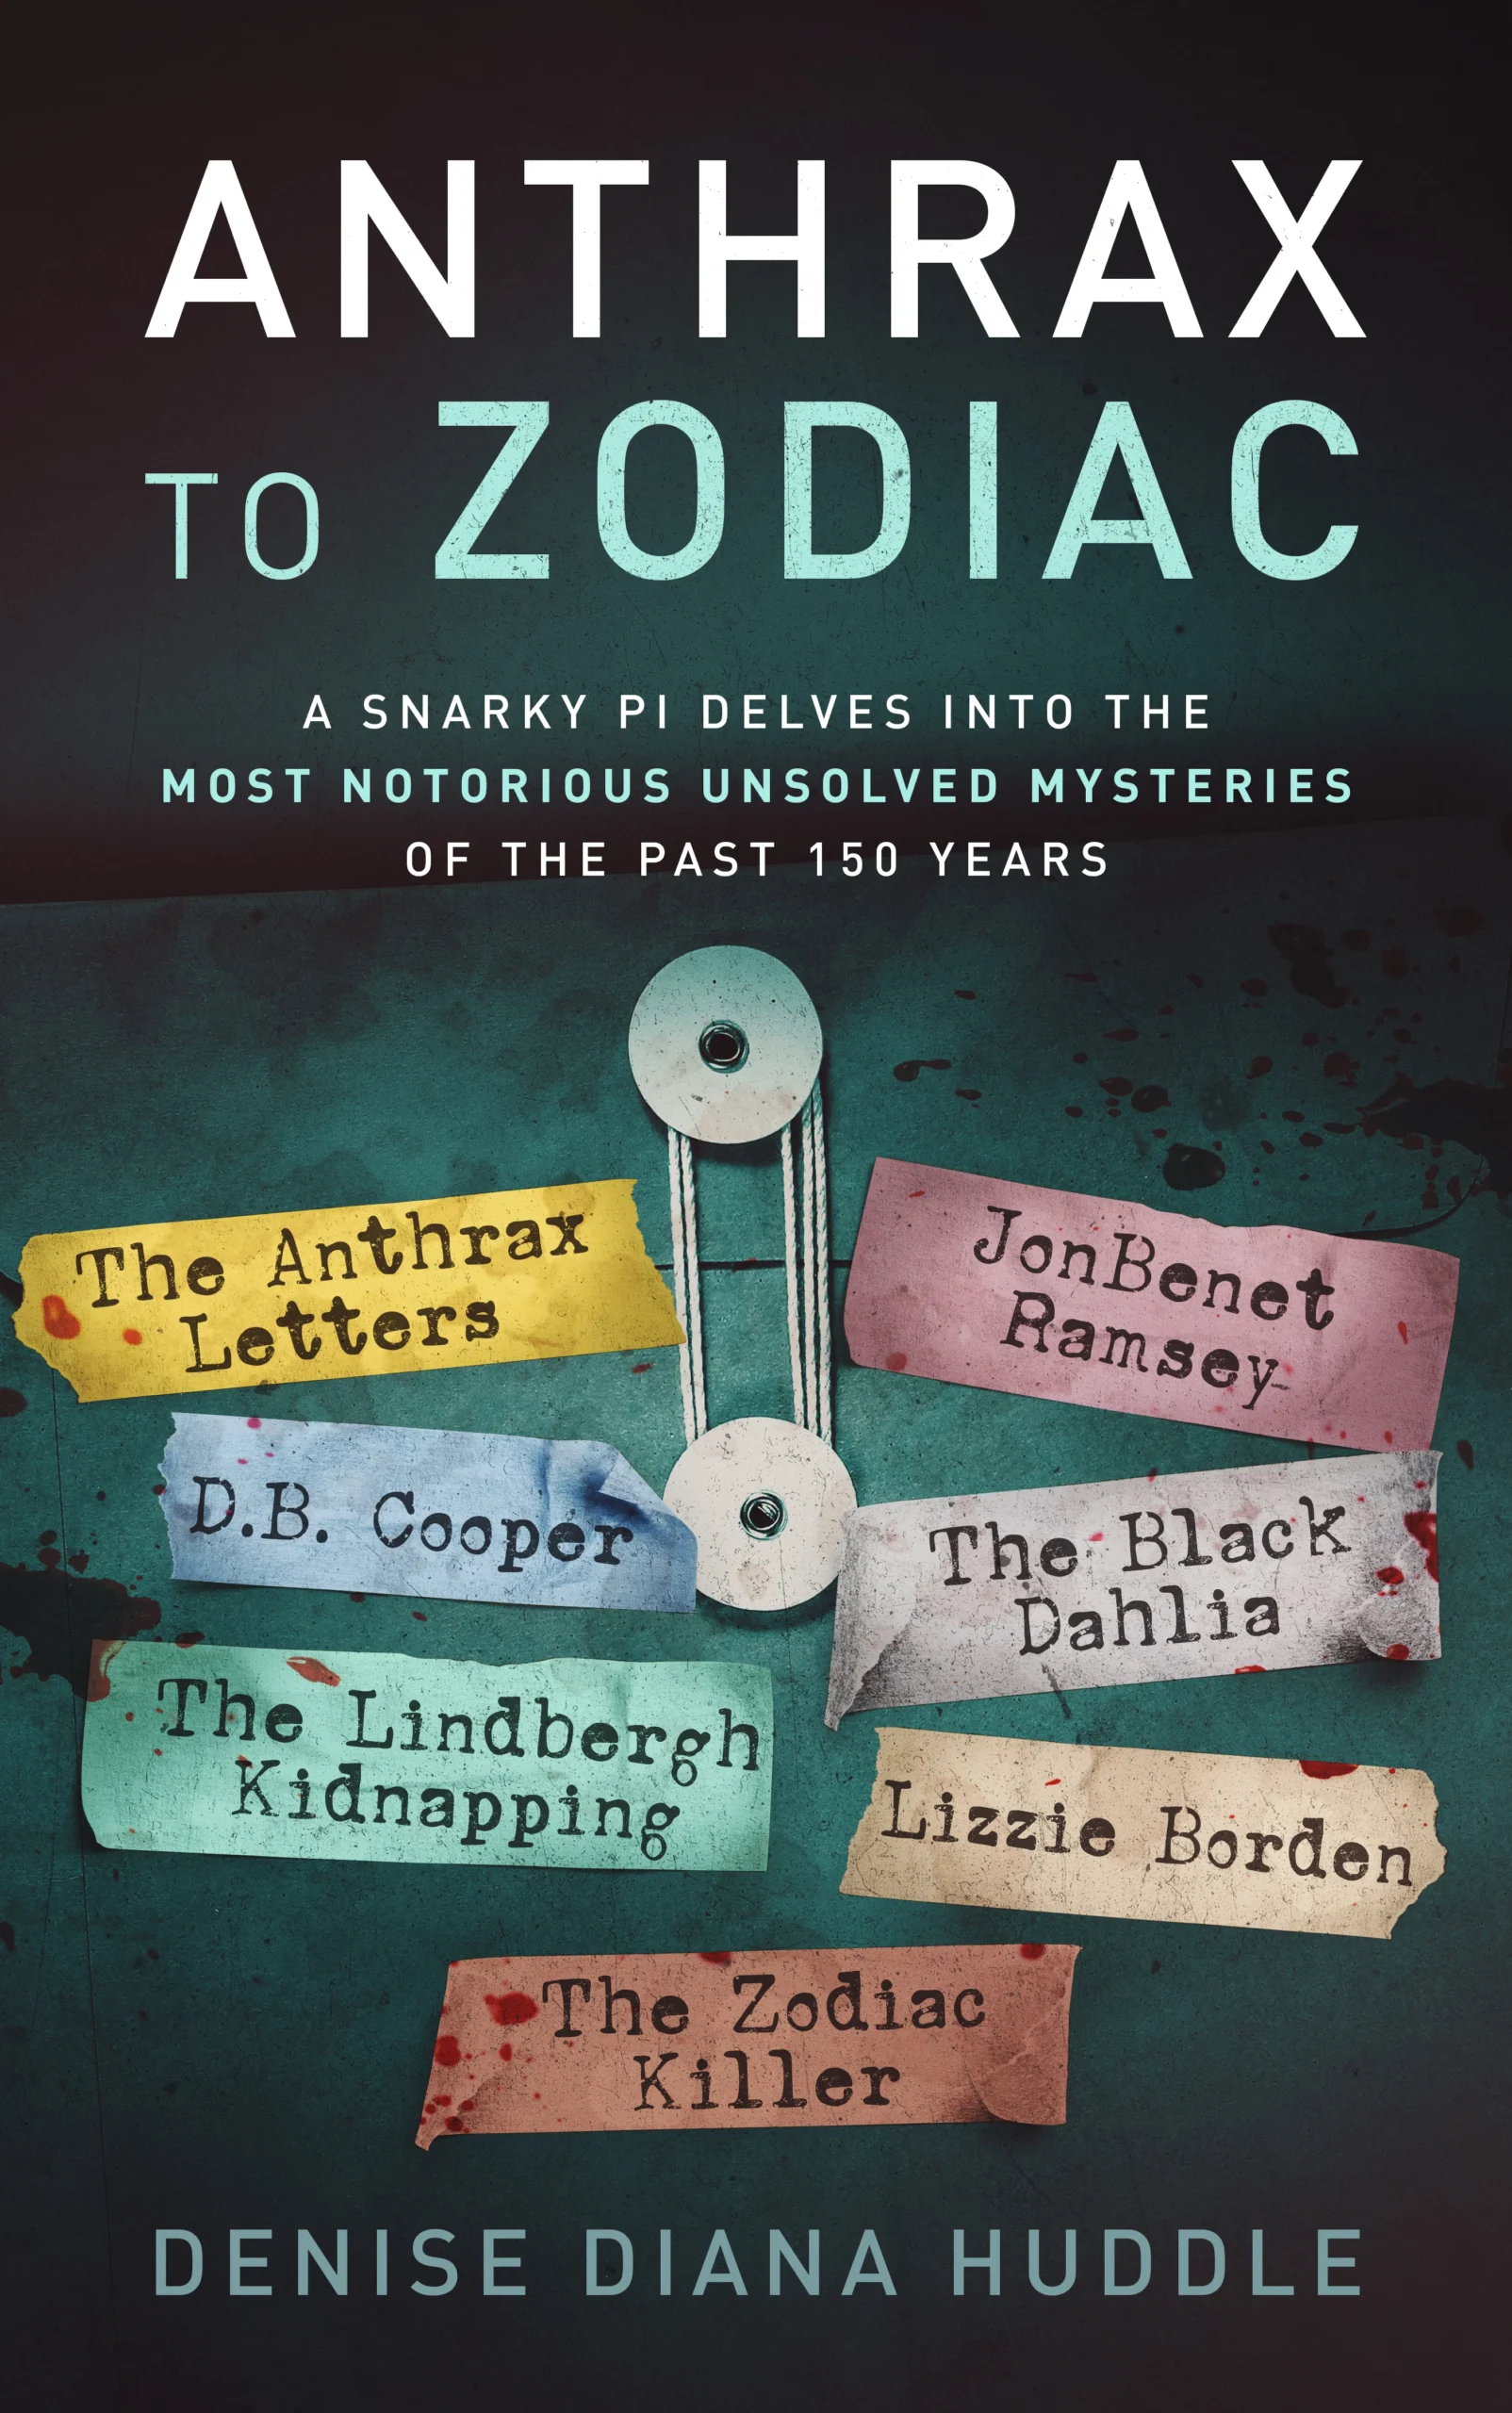 Anthrax to Zodiac – A Snarky PI Delves into the Most Notorious Unsolved Mysteries of the Past 150 Years